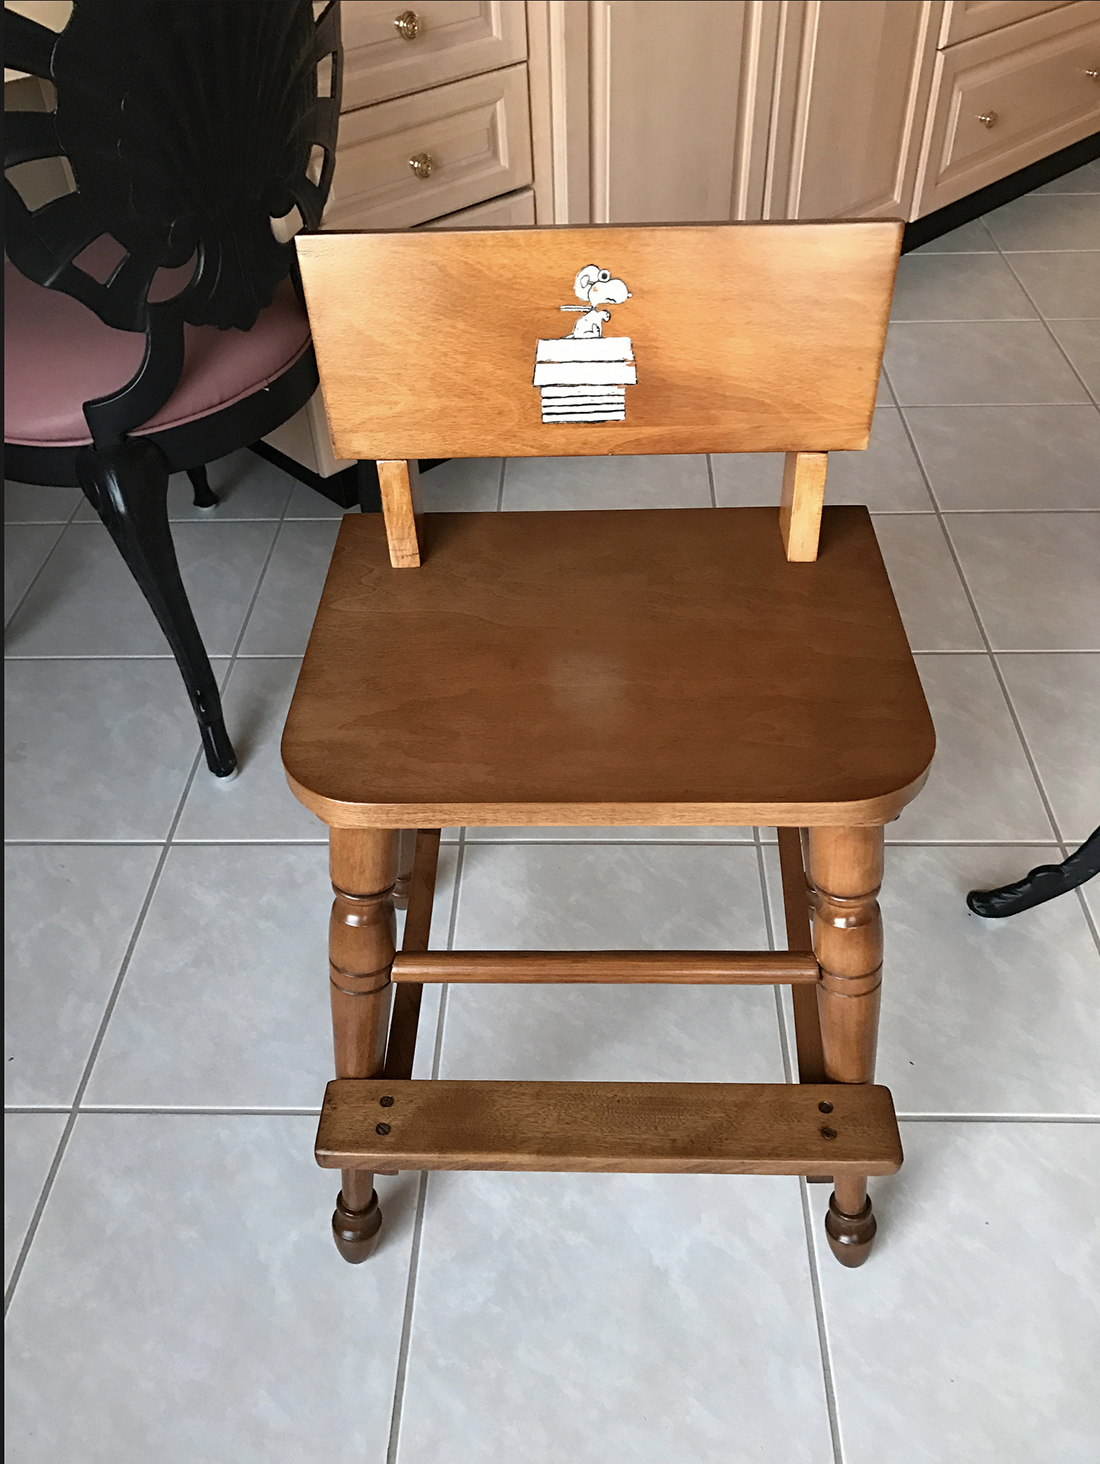 completed-refinishing-childs-chair